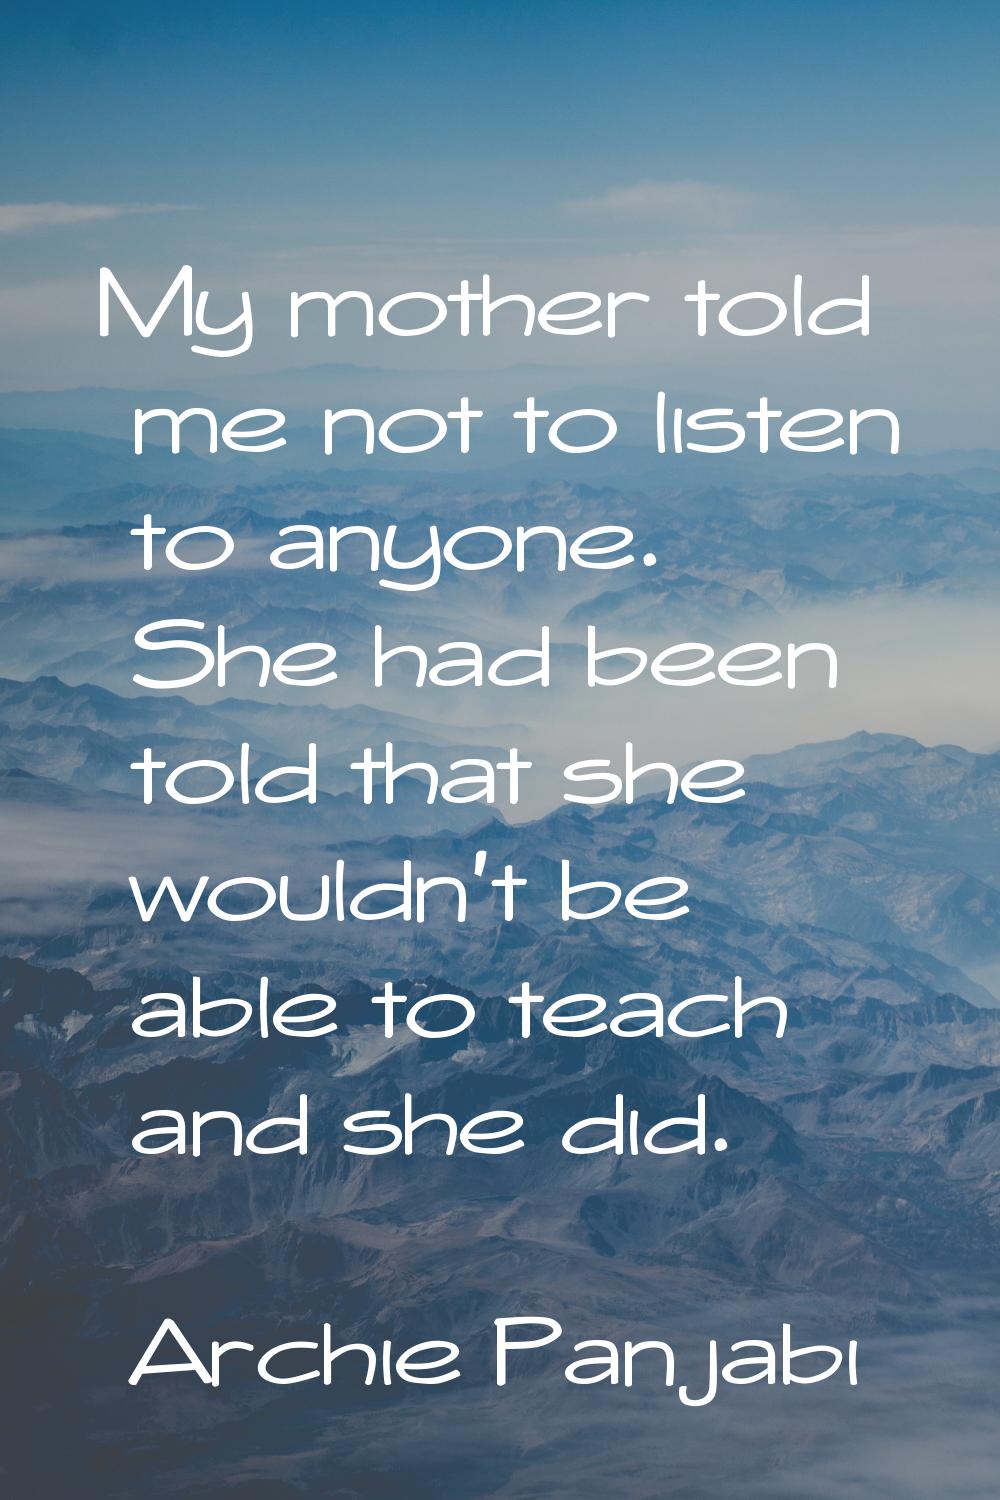 My mother told me not to listen to anyone. She had been told that she wouldn't be able to teach and